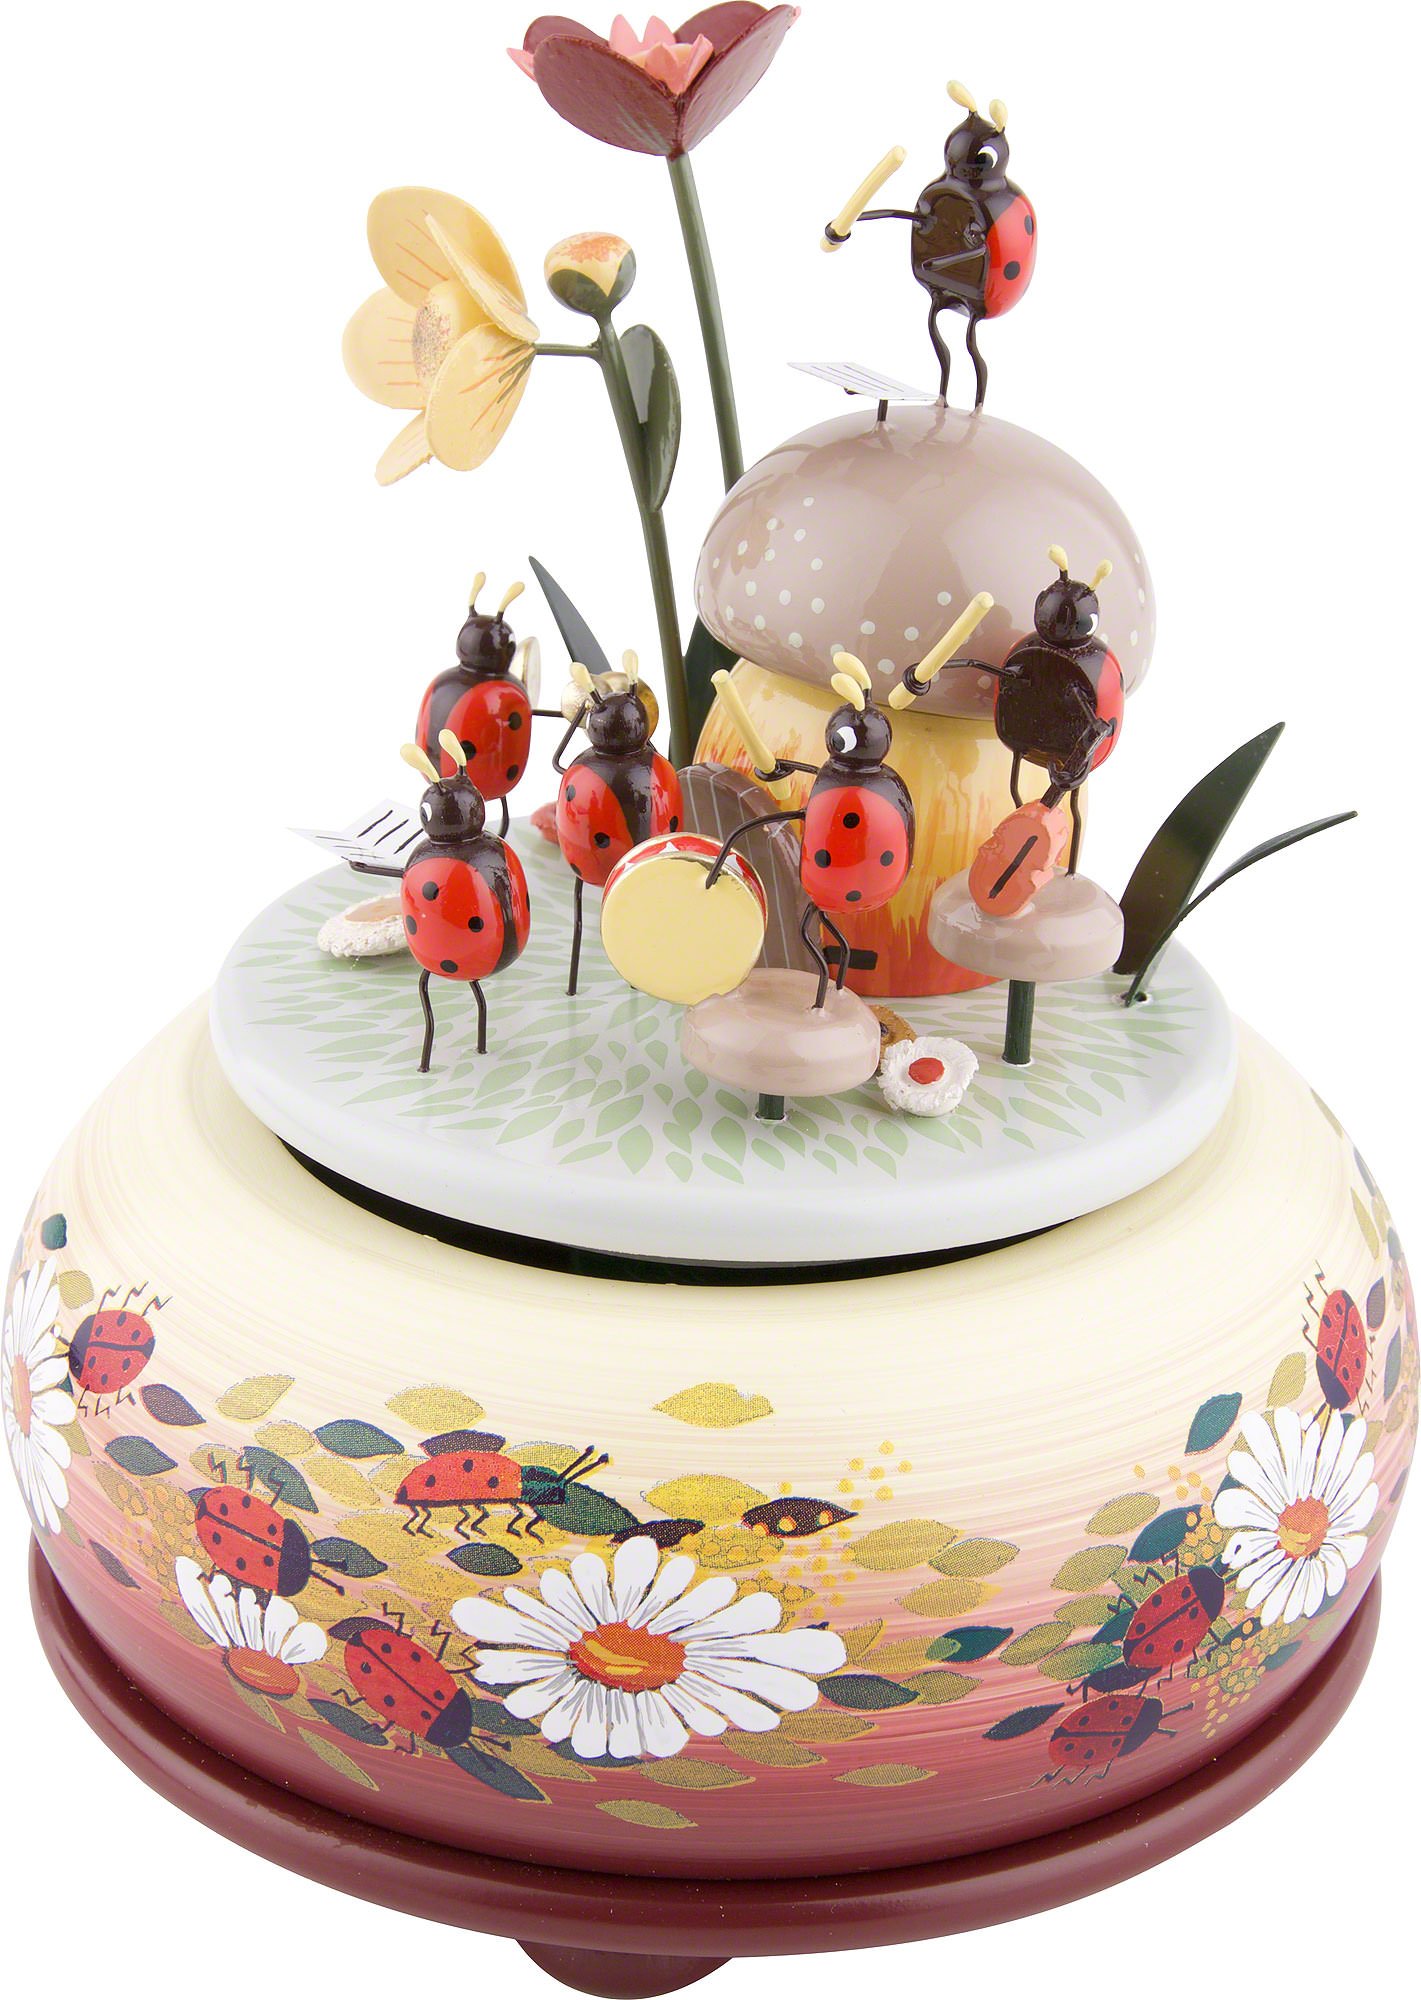 Music Box Beetle Orchestra - 15 cm / 6 inch